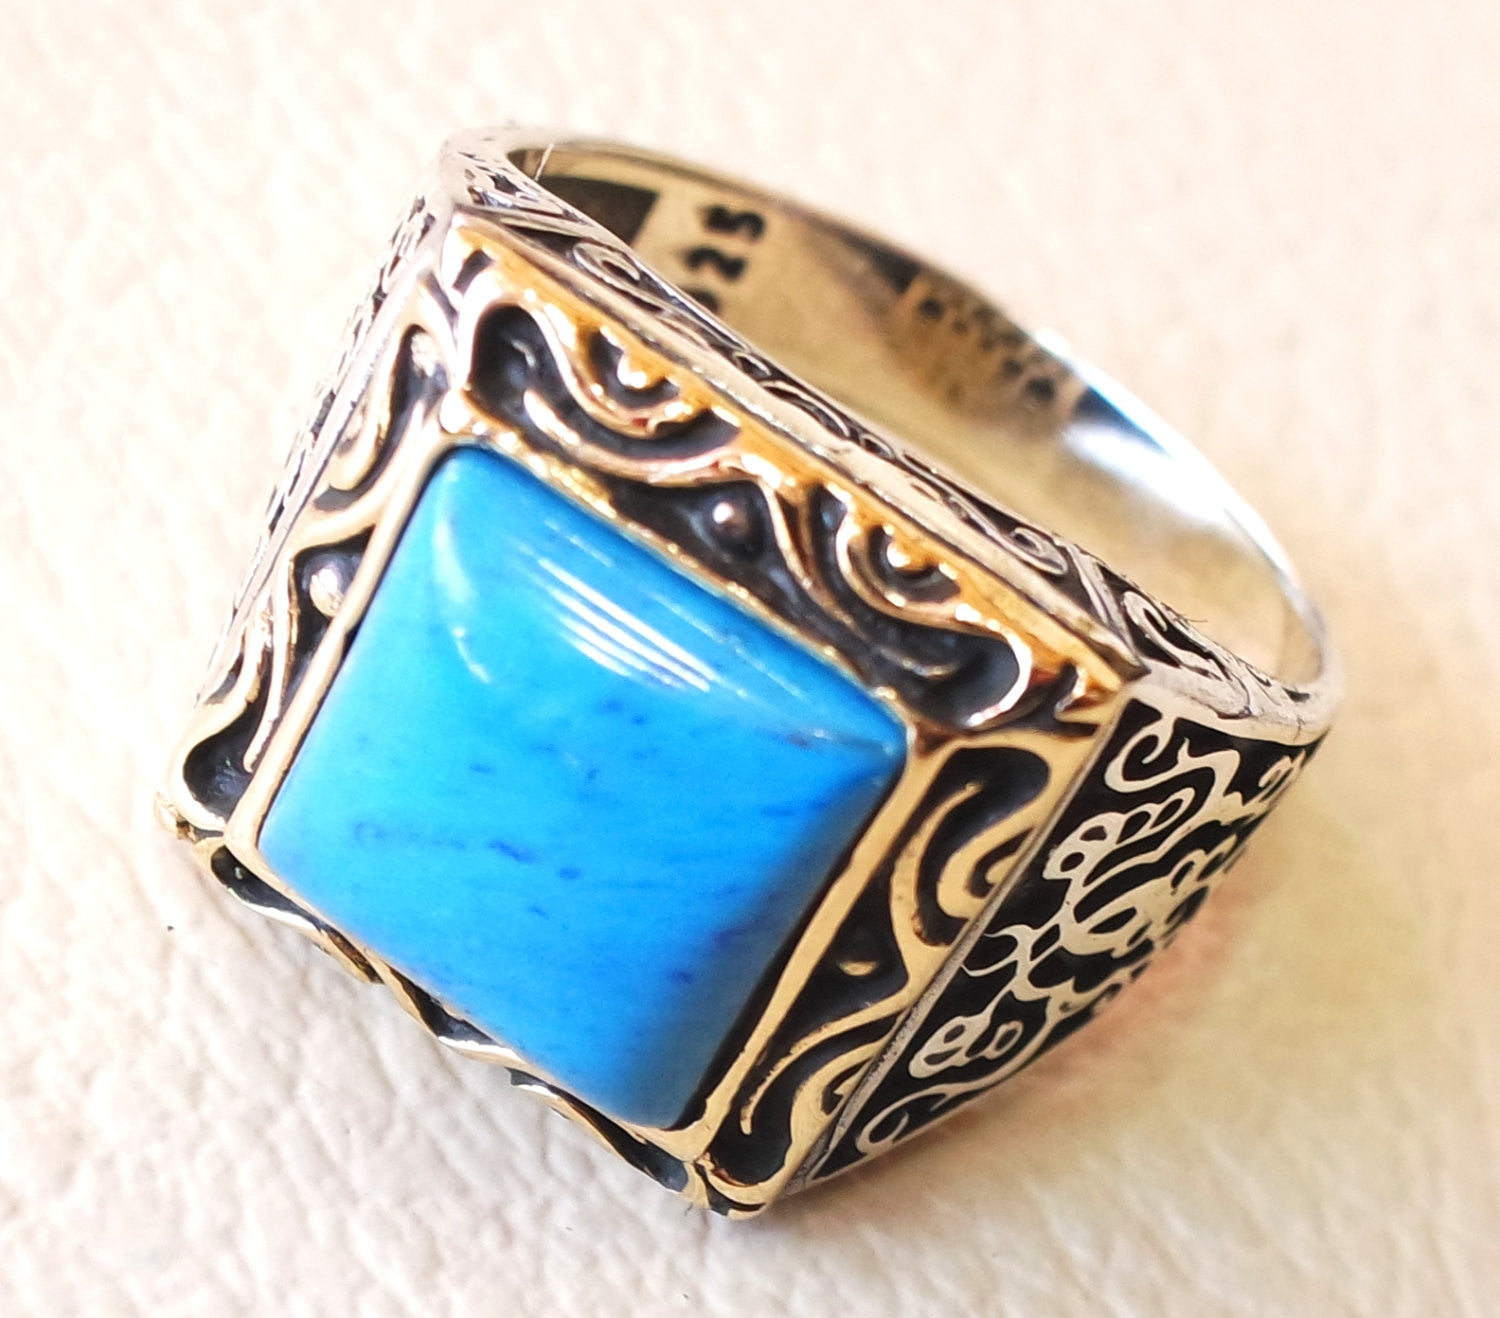 square synthetic turquoise blue stone heavy sterling silver 925 man ring bronze frame any size antique middle eastern ottoman style jewelry